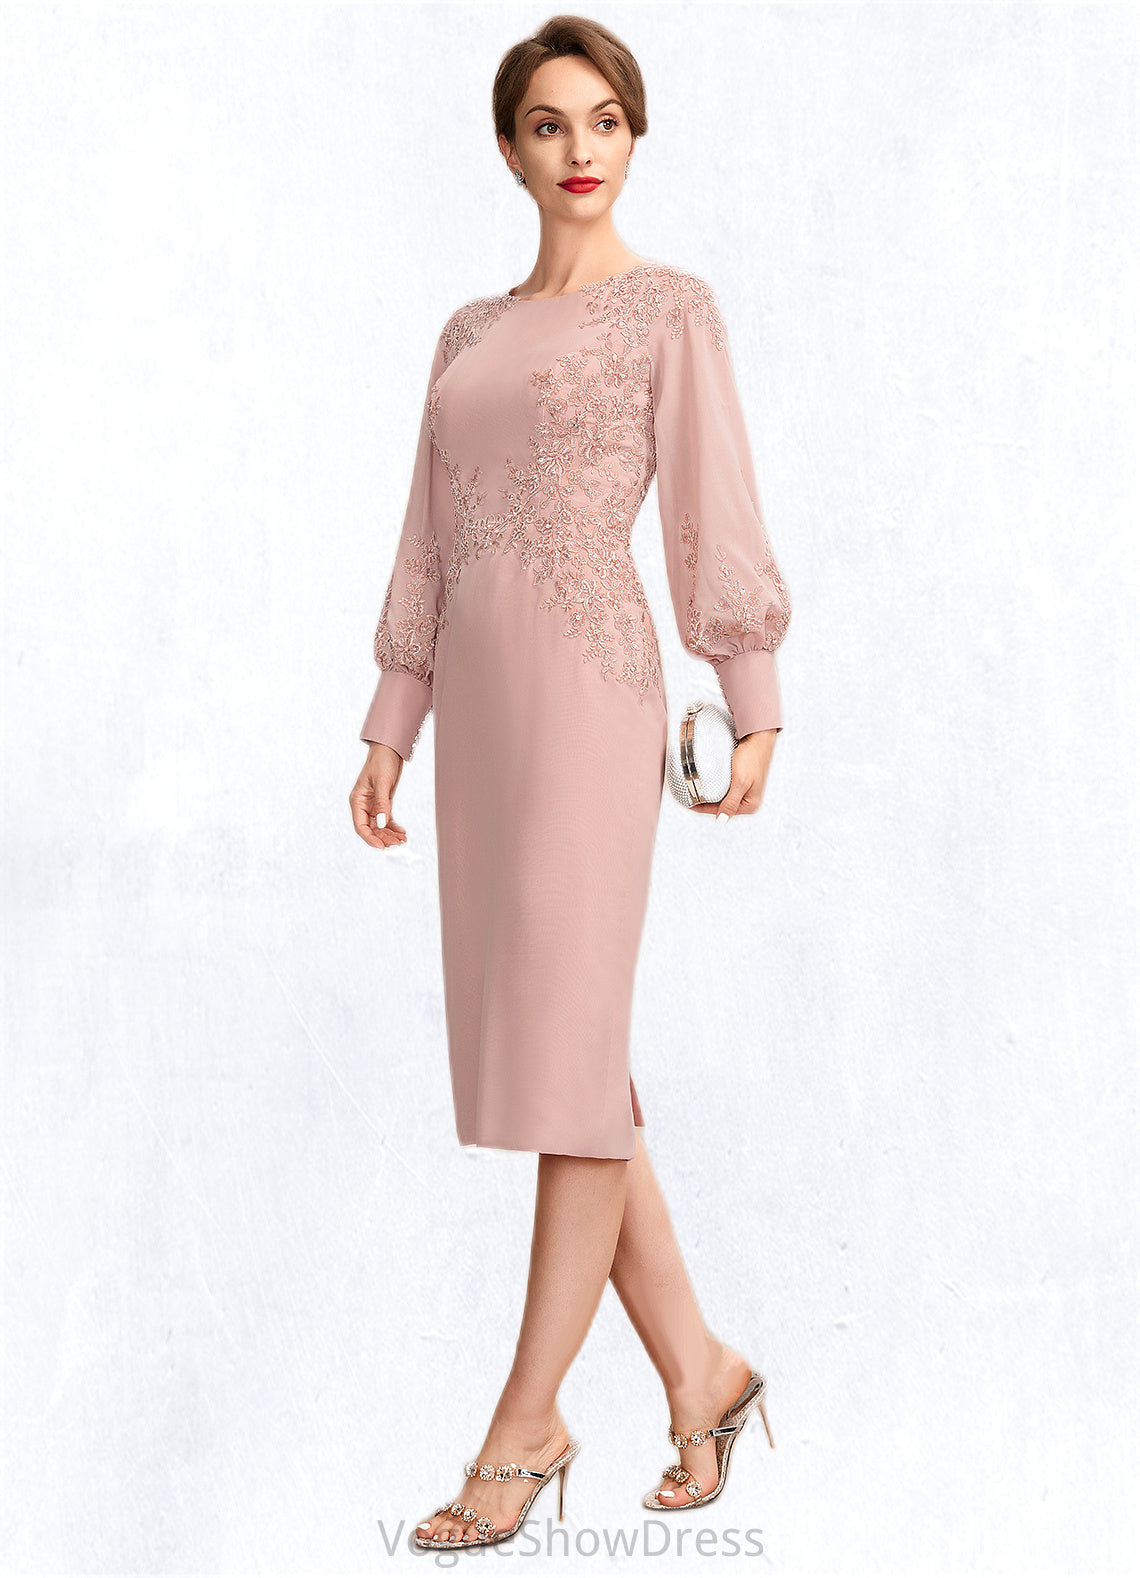 Leah Sheath/Column Scoop Neck Knee-Length Chiffon Lace Mother of the Bride Dress With Beading Sequins DL126P0015020